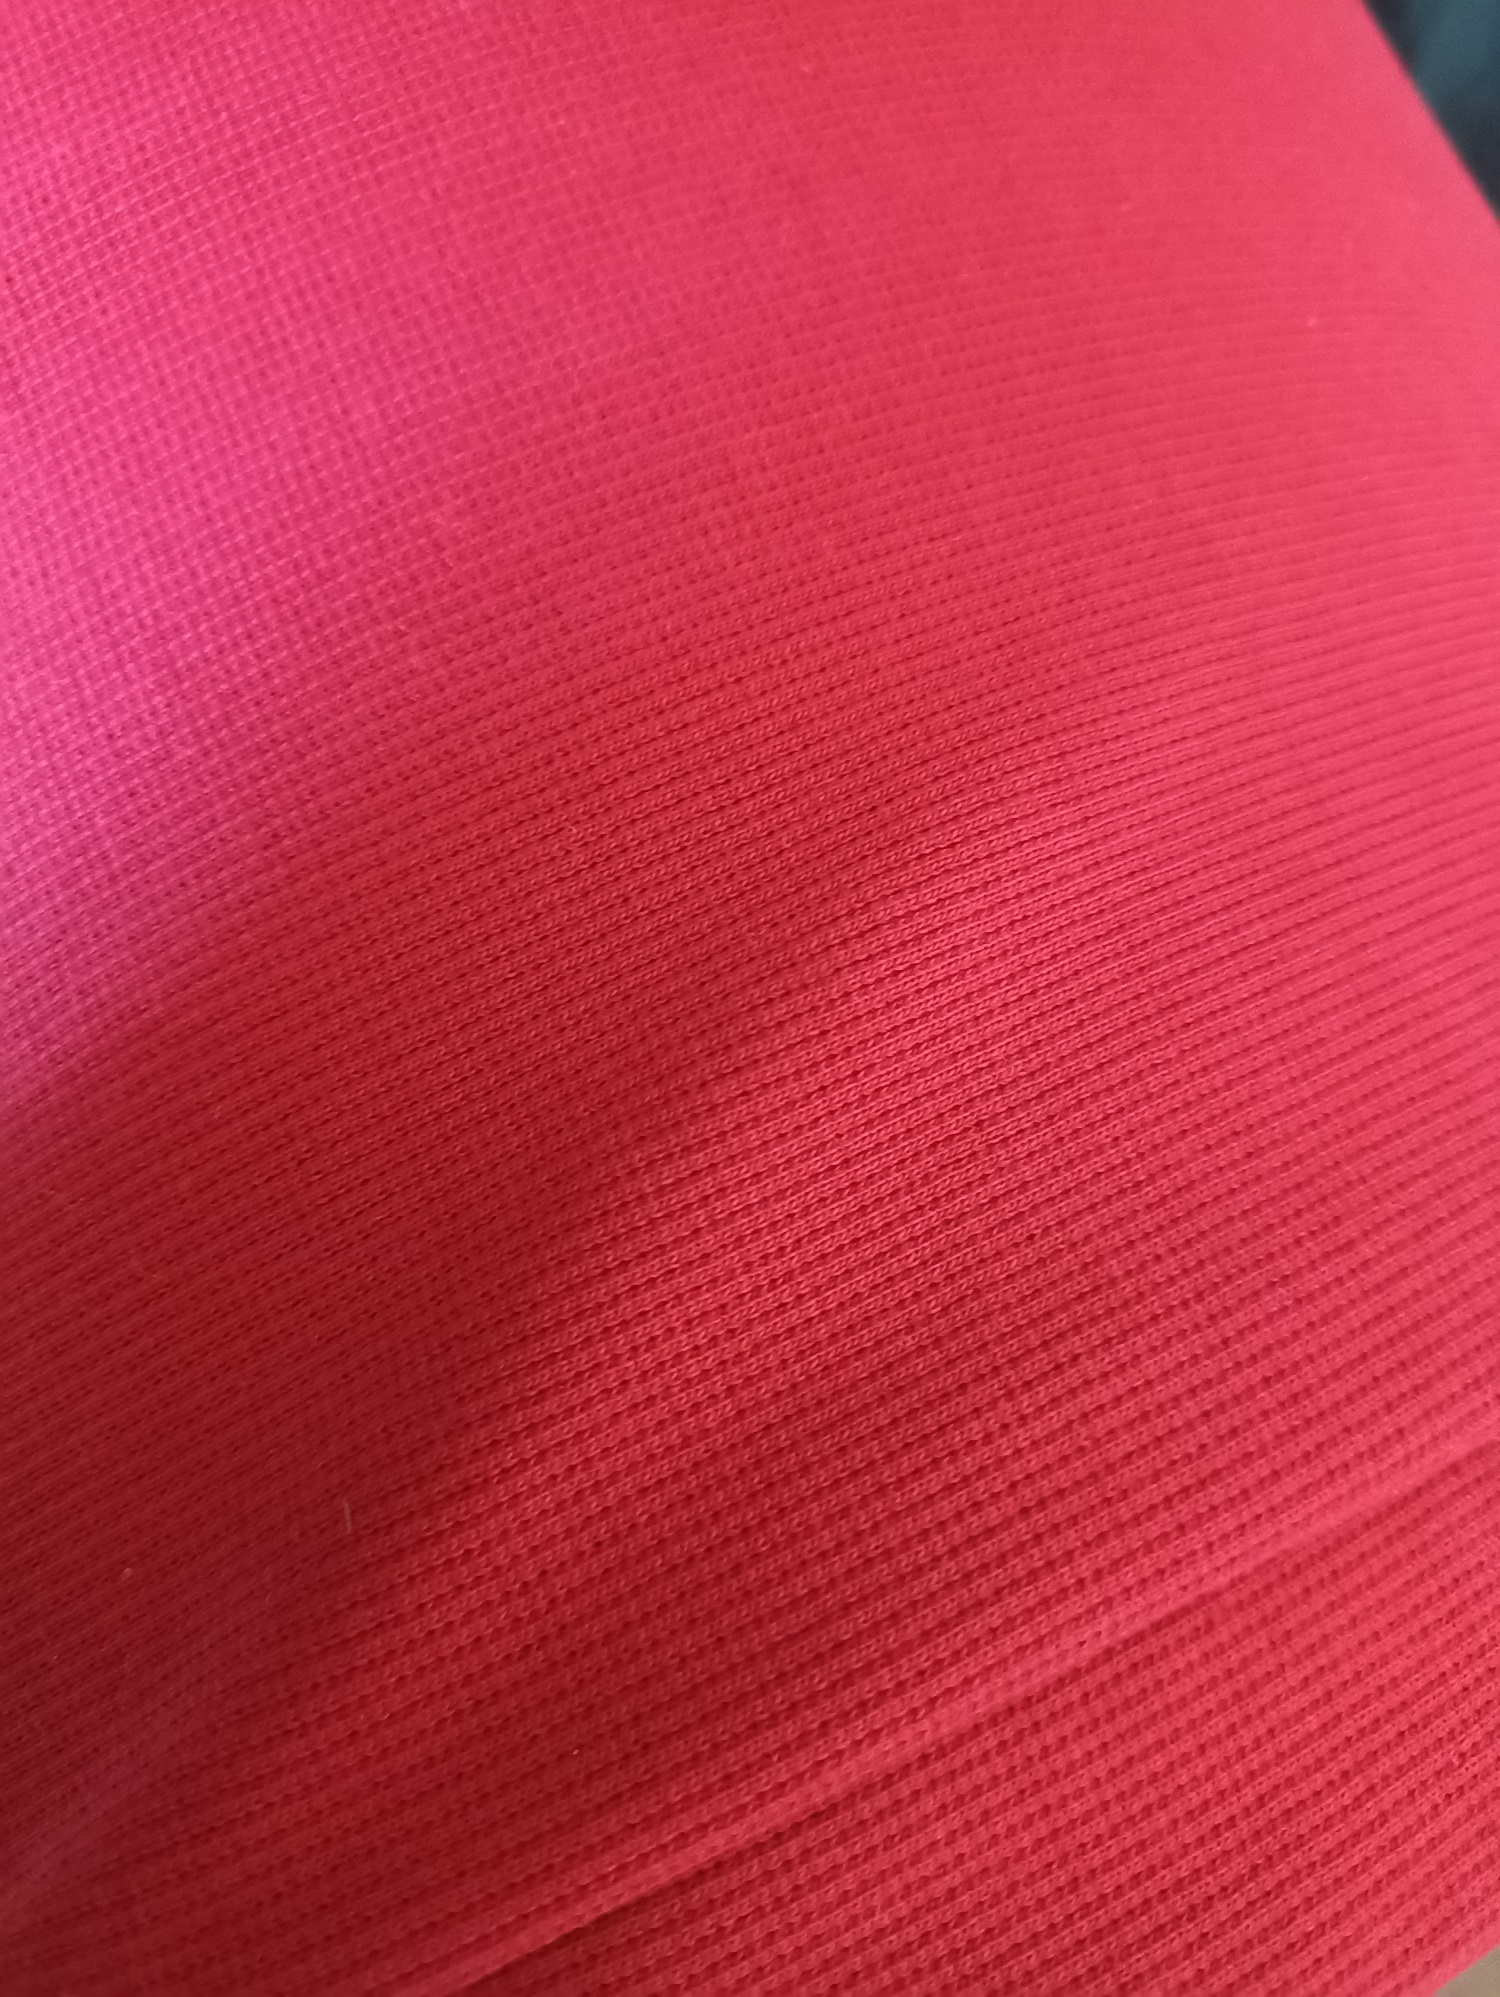 Ribbed knit / knitted fabric, 350 gr/m2, 2x2 RIB, tunnel width 60cmx2, 1 meter, pink